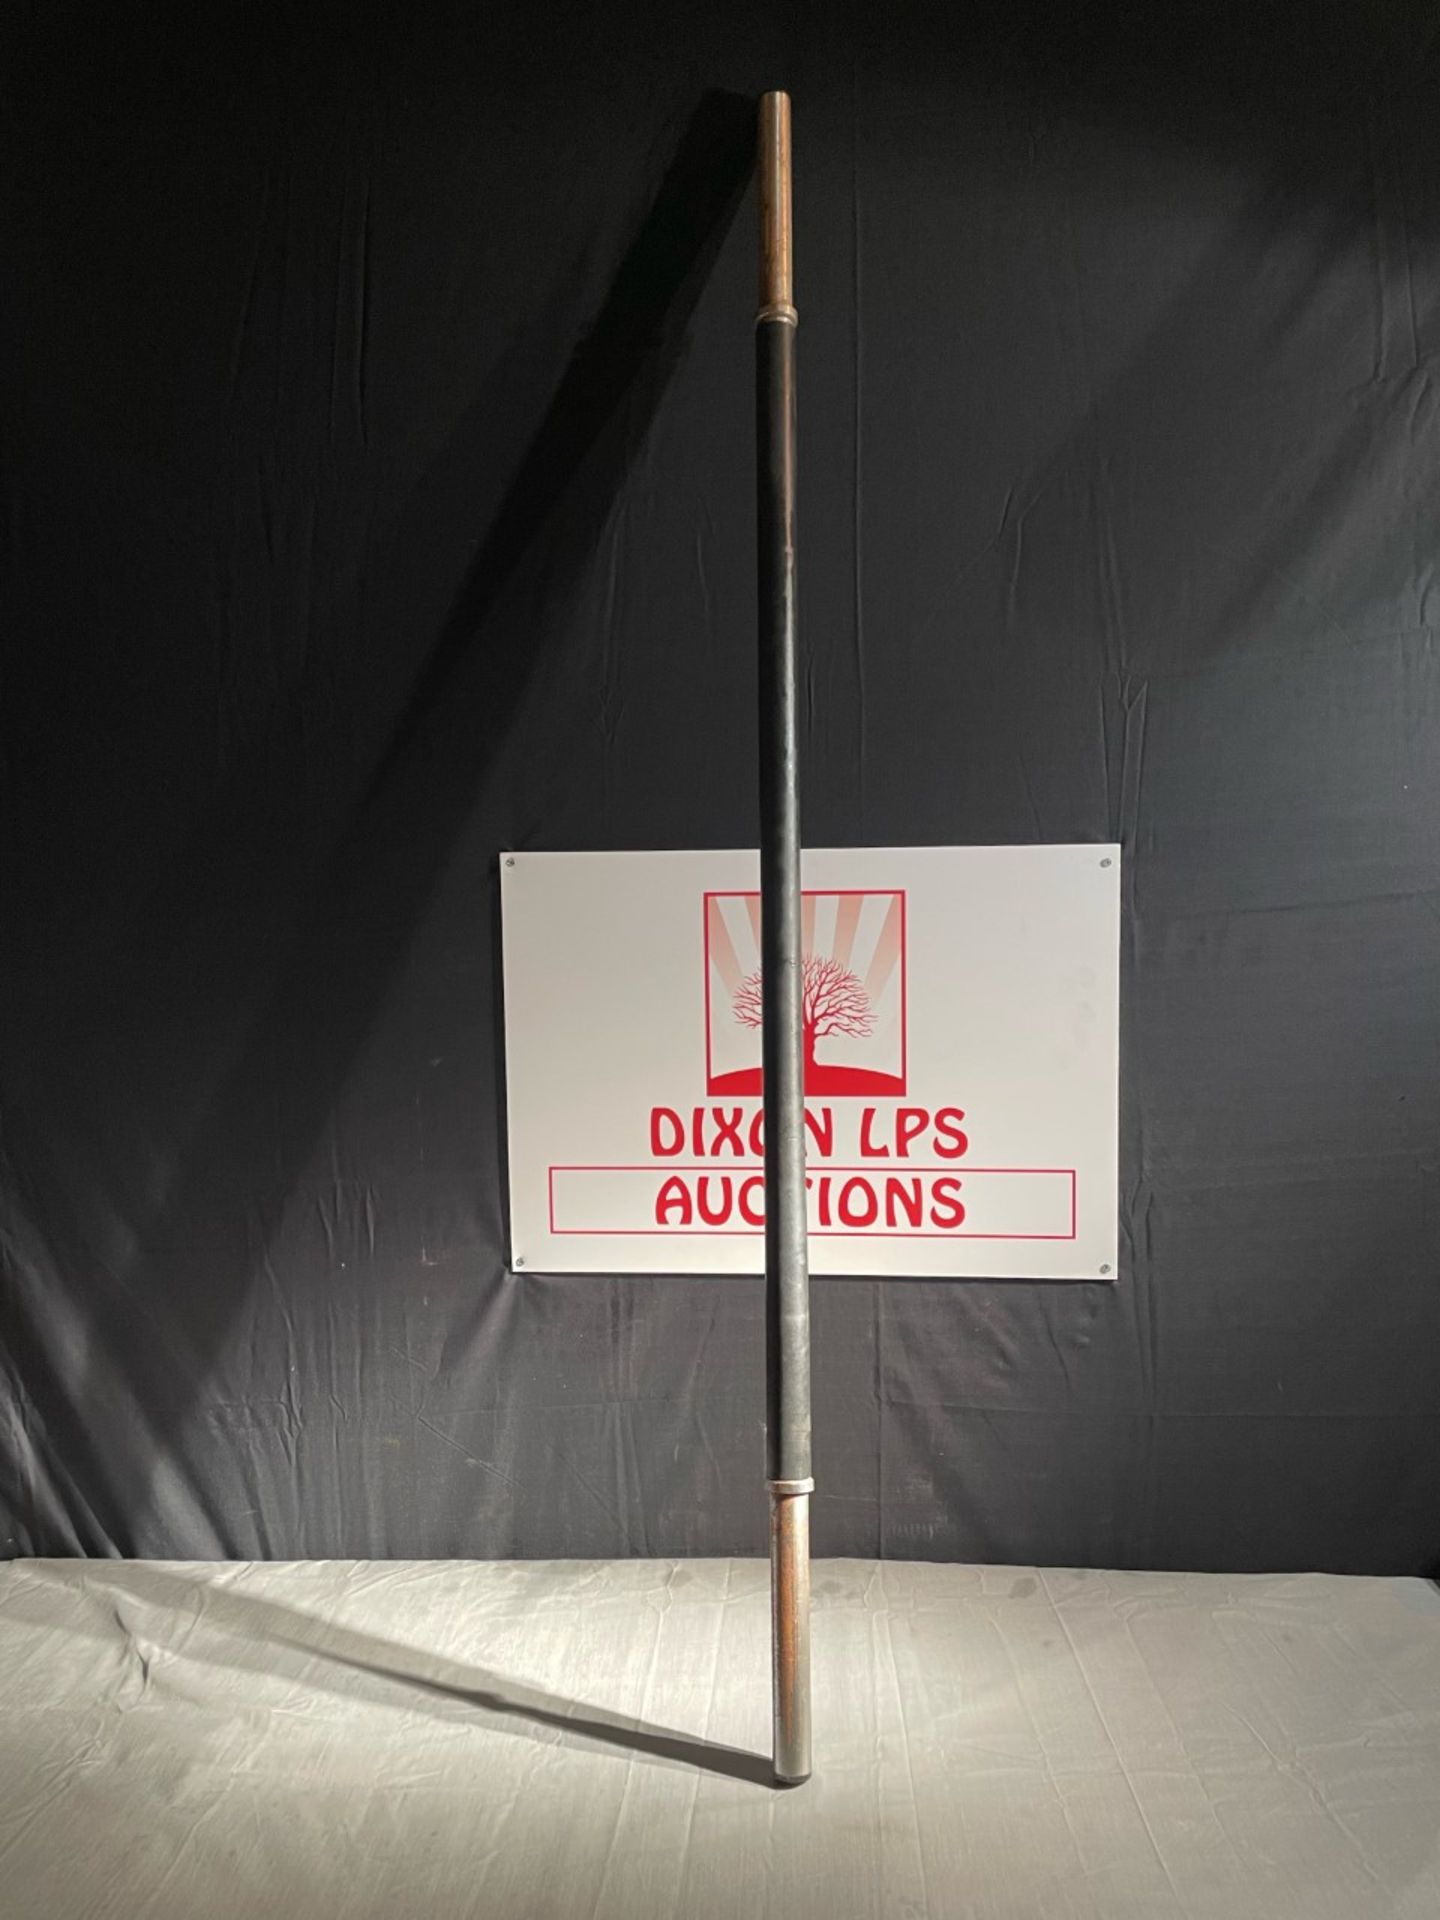 5ft weights bar with rubber grip. Used condition